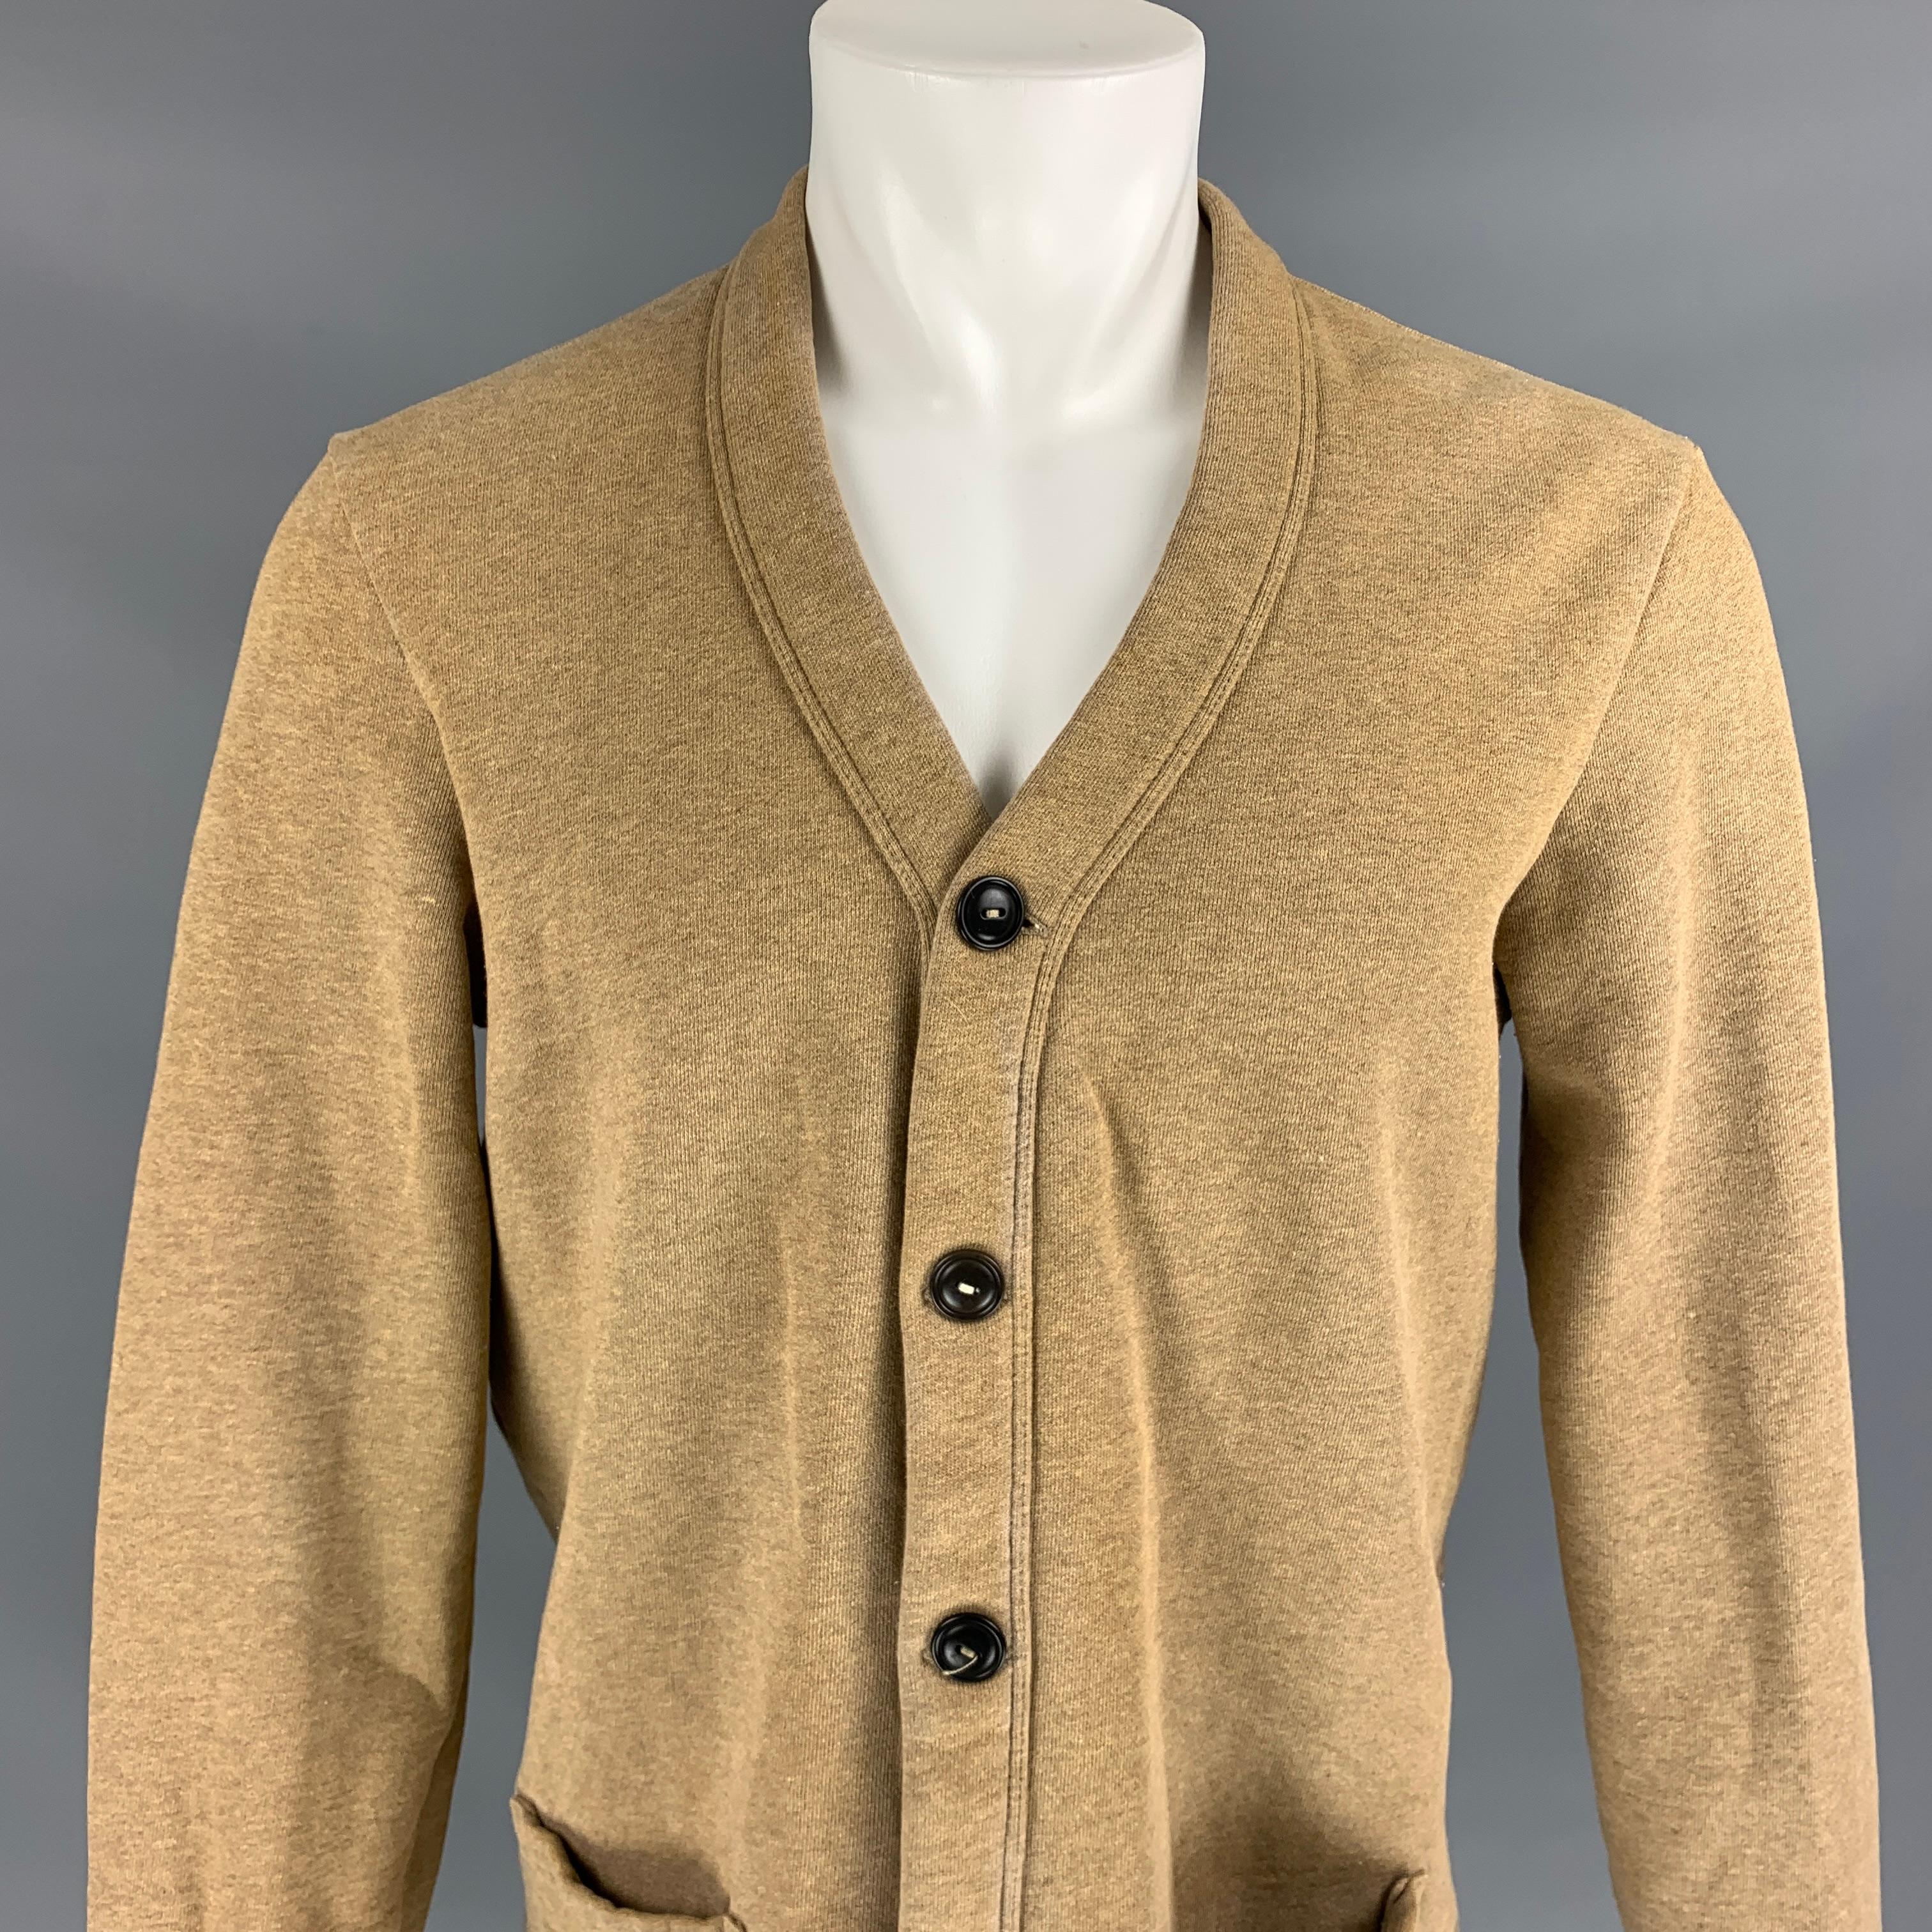 POLO by RALPH LAUREN cardigan comes in a tan cotton / polyester featuring front pockets and a buttoned closure. 

Very Good Pre-Owned Condition.
Marked: M

Measurements:

Shoulder: 18.5 in.
Chest: 40 in.
Sleeve: 27.5 in.
Length: 27 in. 